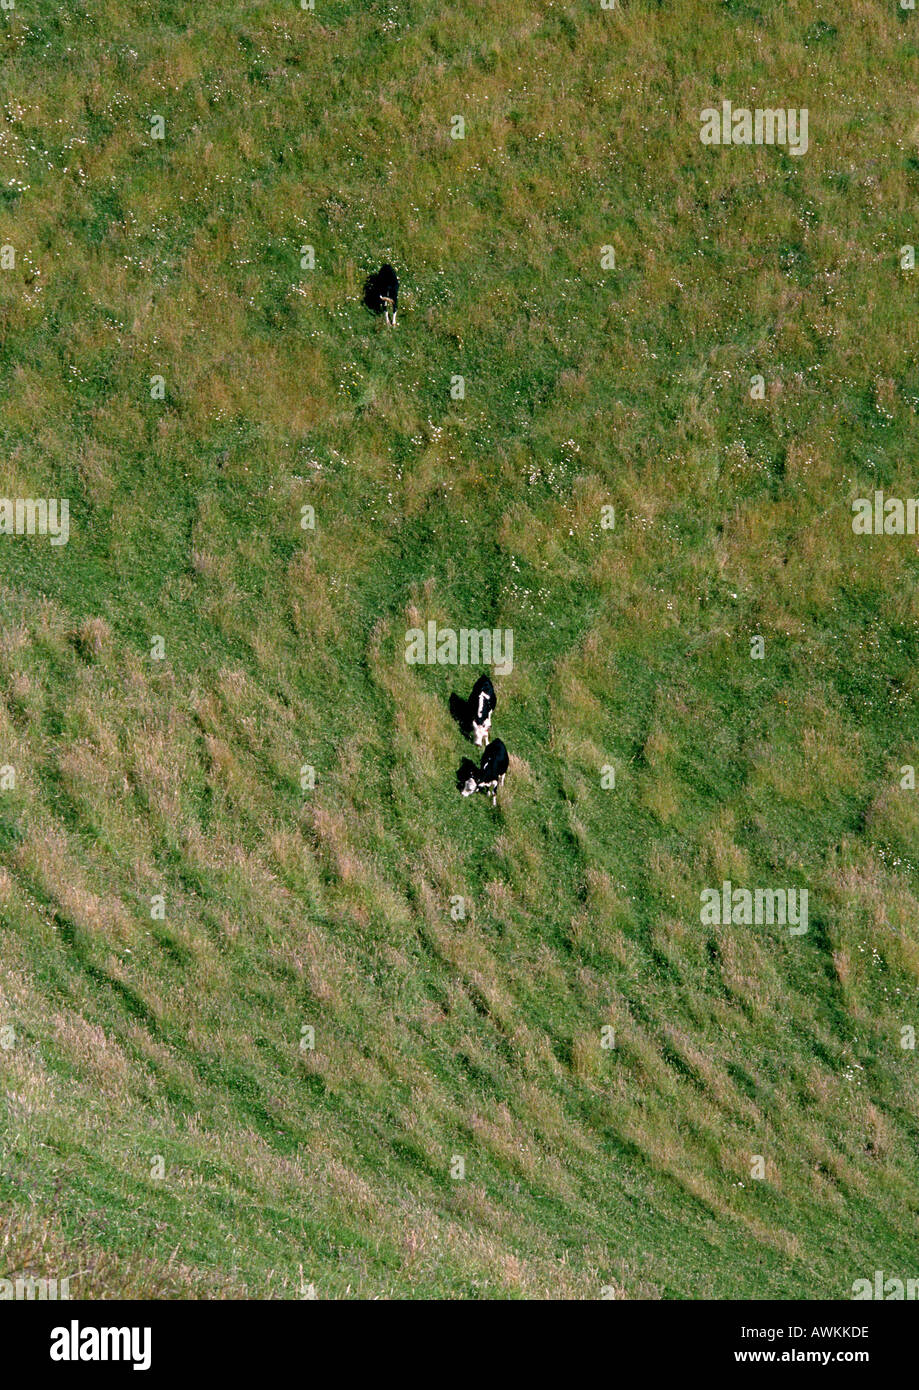 New Zealand, cows in a grassy field, aerial view Stock Photo